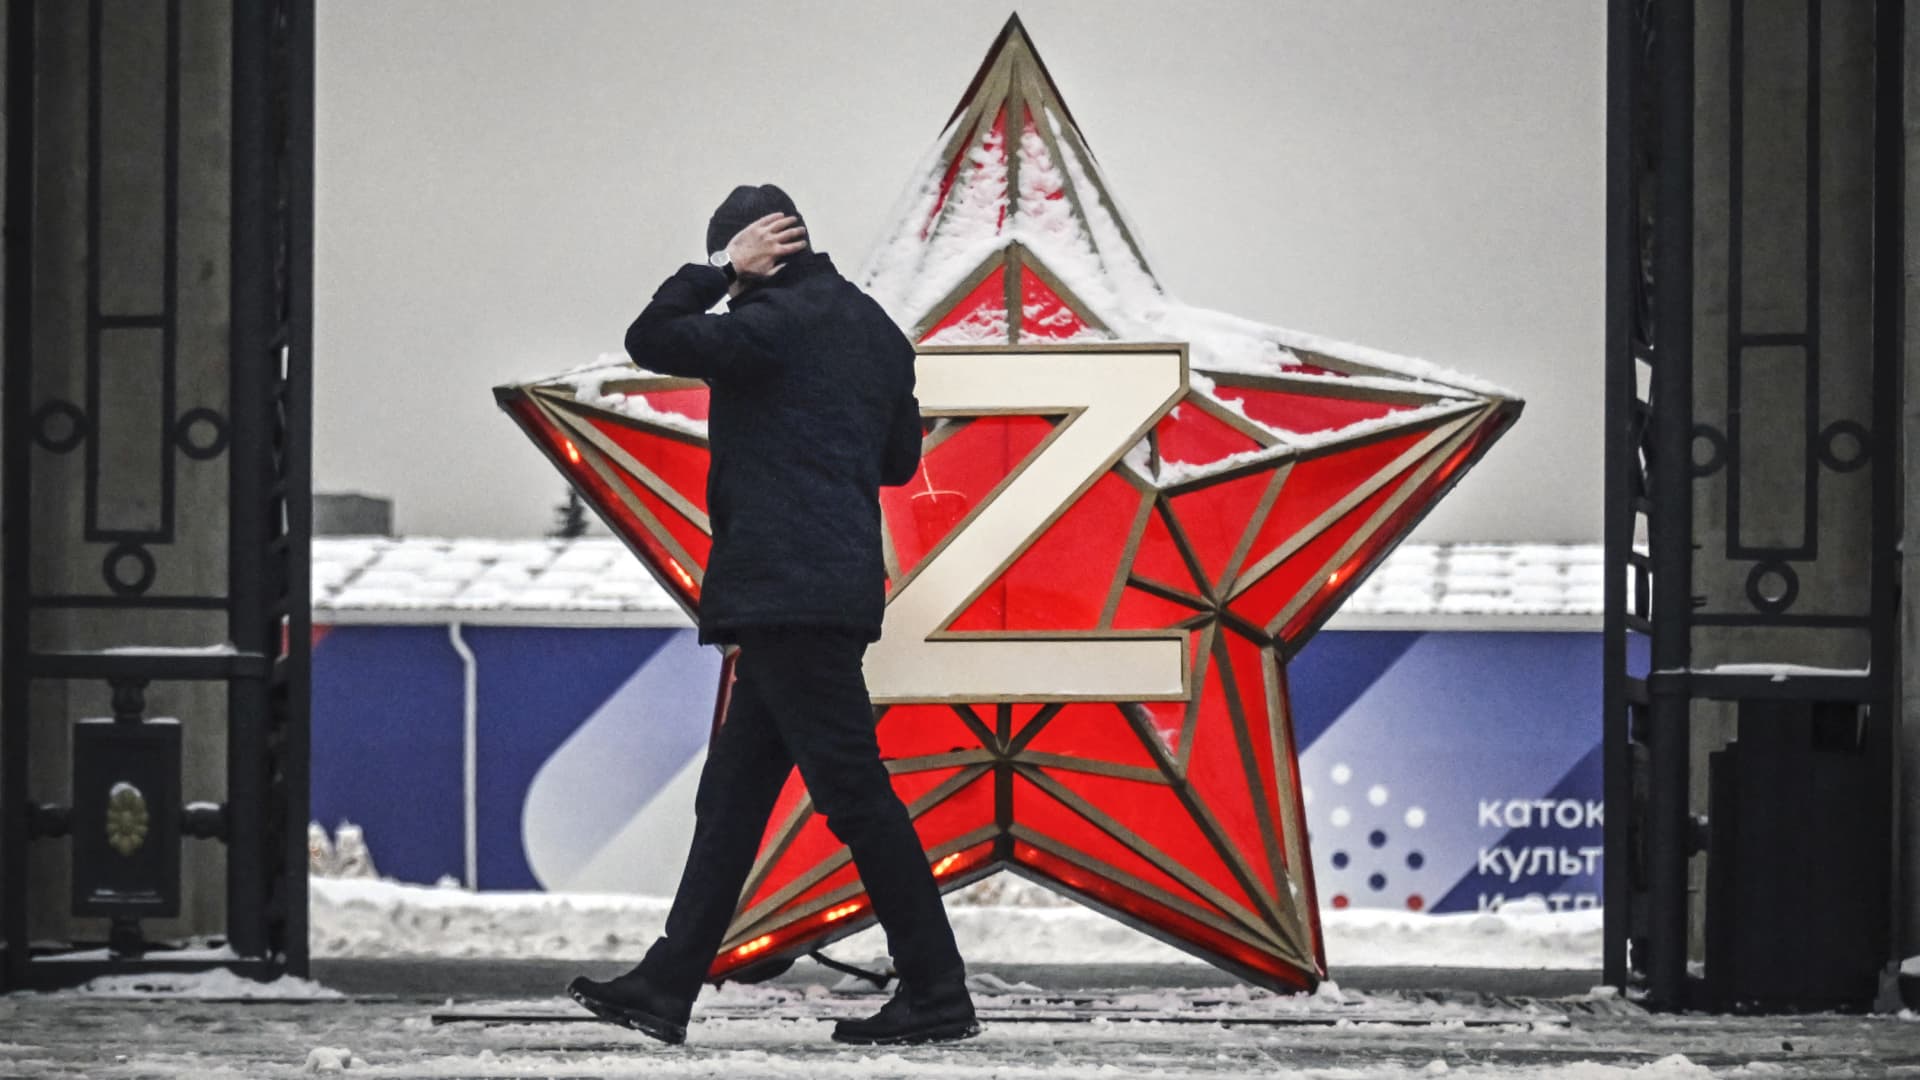 A New Year decoration Kremlin Star, bearing the letter Z, a tactical insignia of Russian troops in Ukraine, at the Gorky Park in Moscow on Dec. 29, 2022.